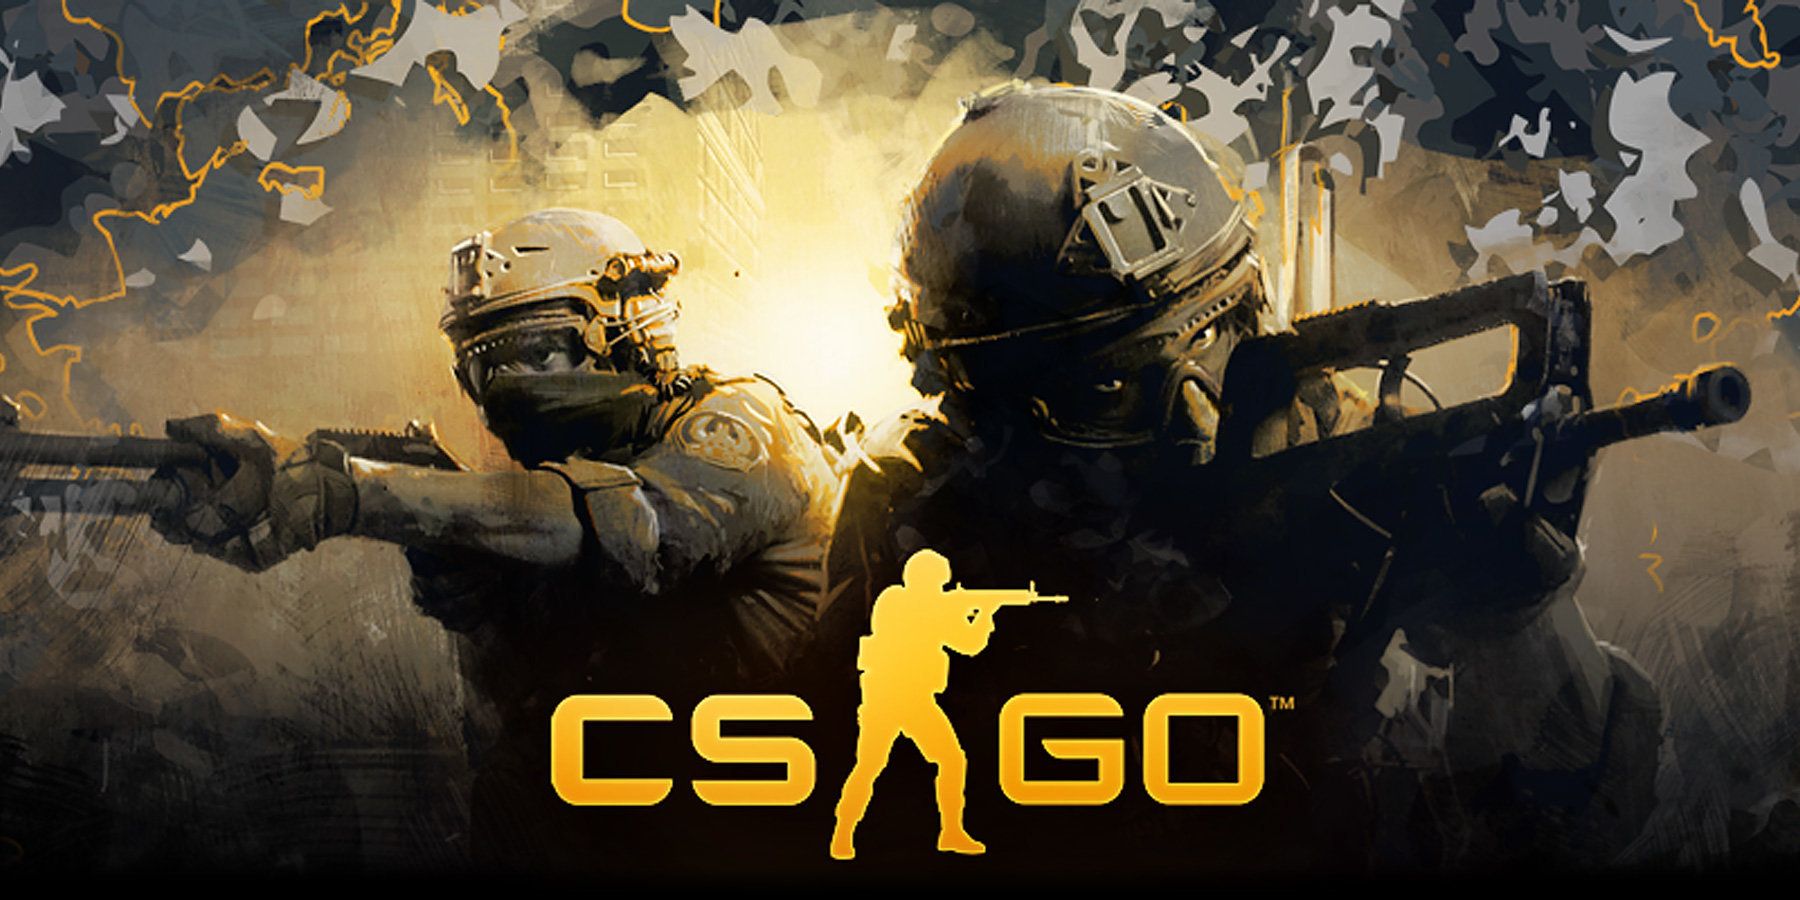 How to be immortal in CS:GO?